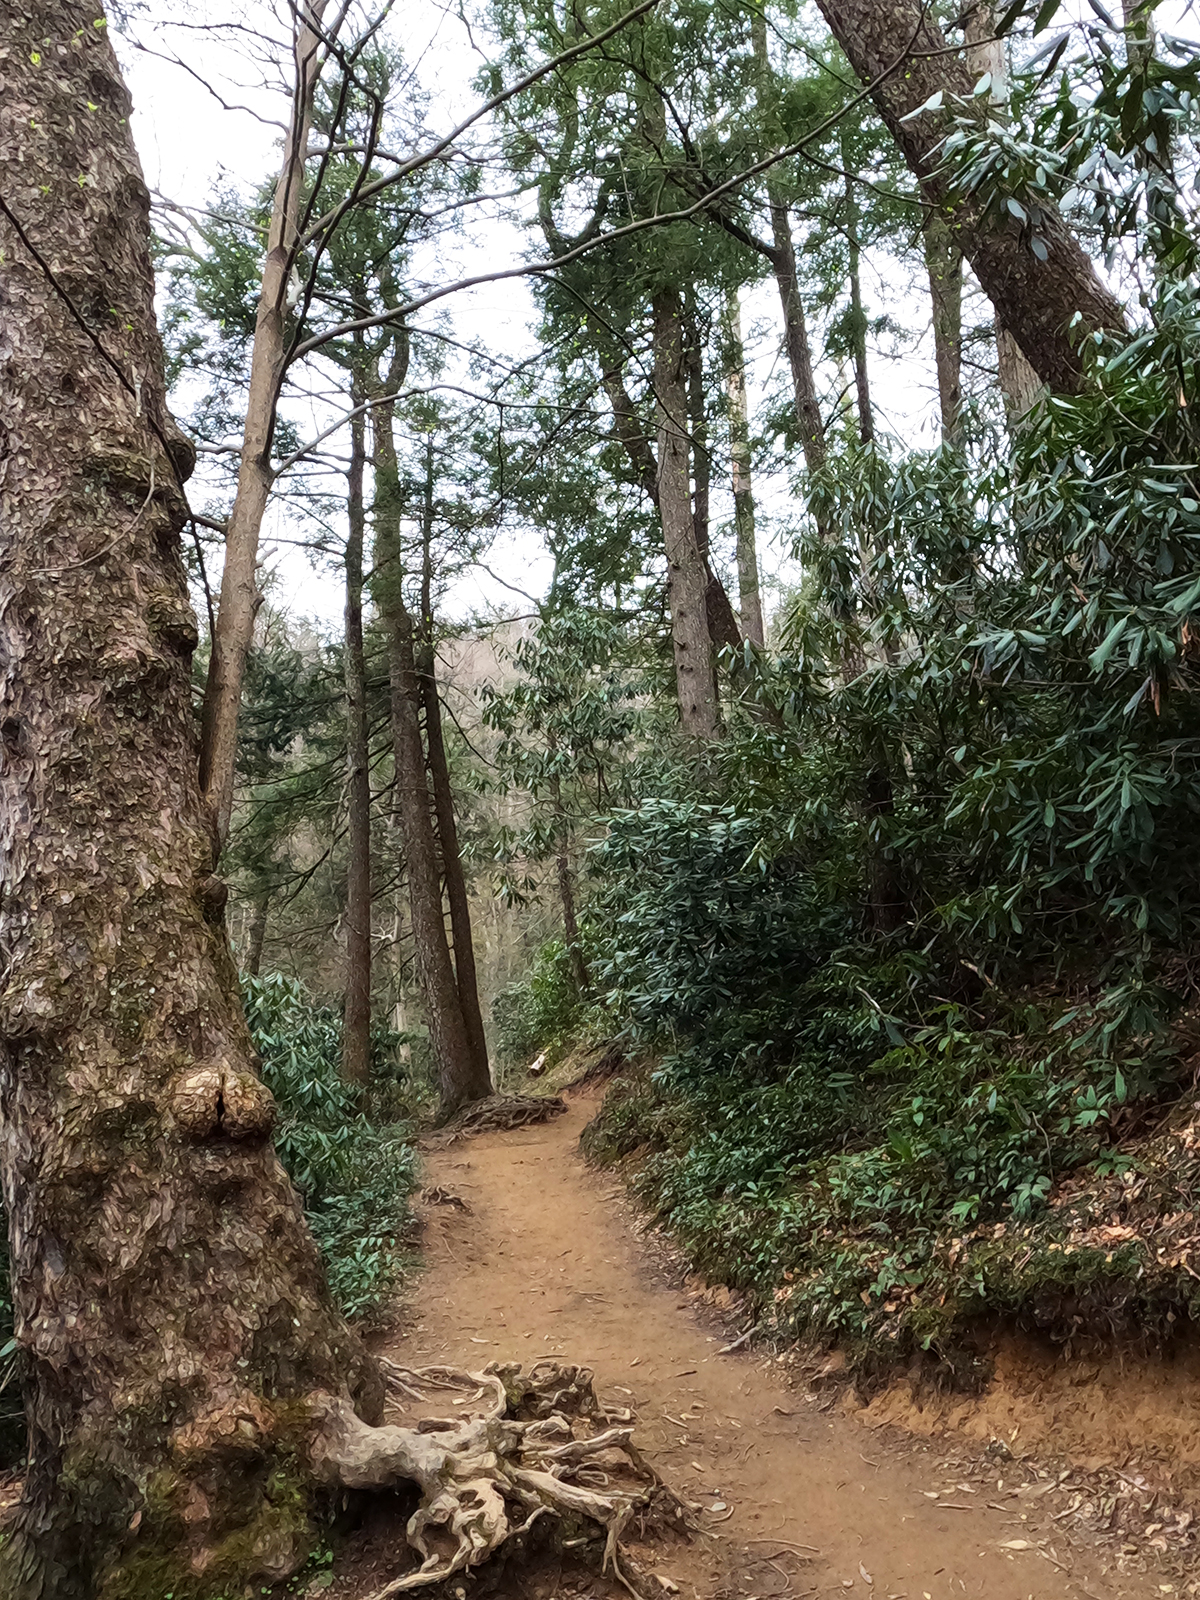 dirt hiking path through forested area with trees surrounding